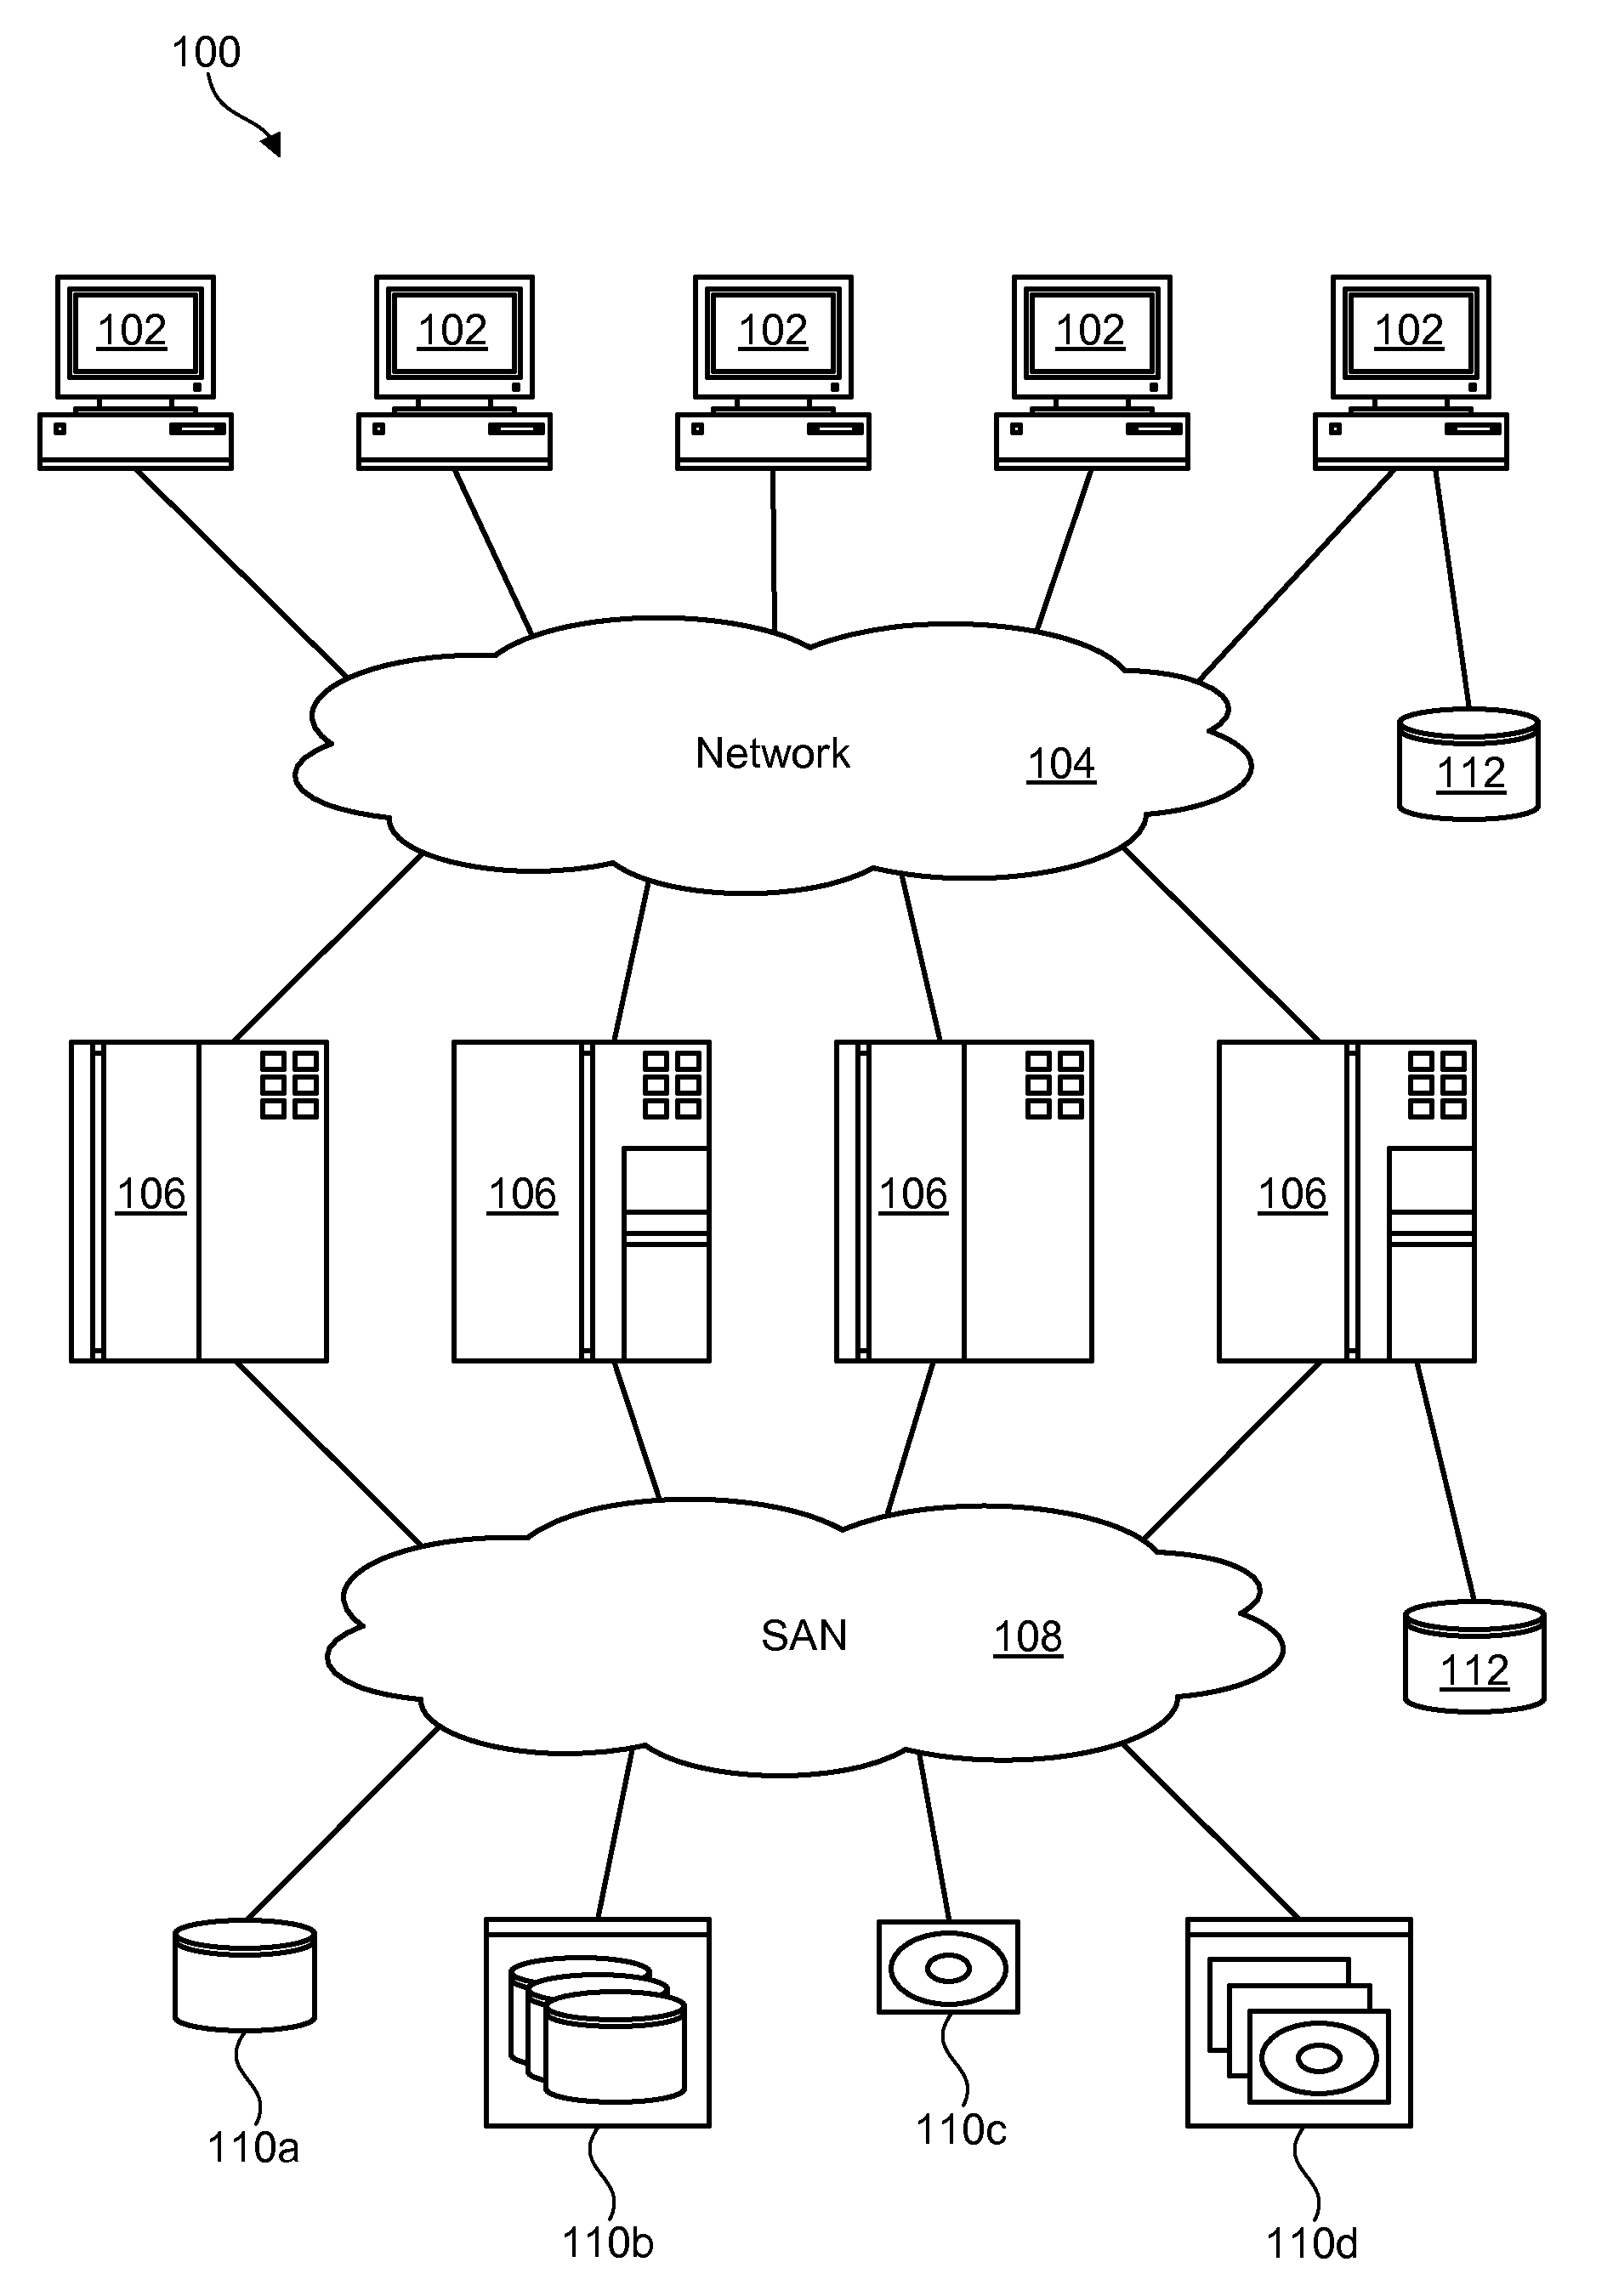 Differential caching mechanism based on media I/O speed